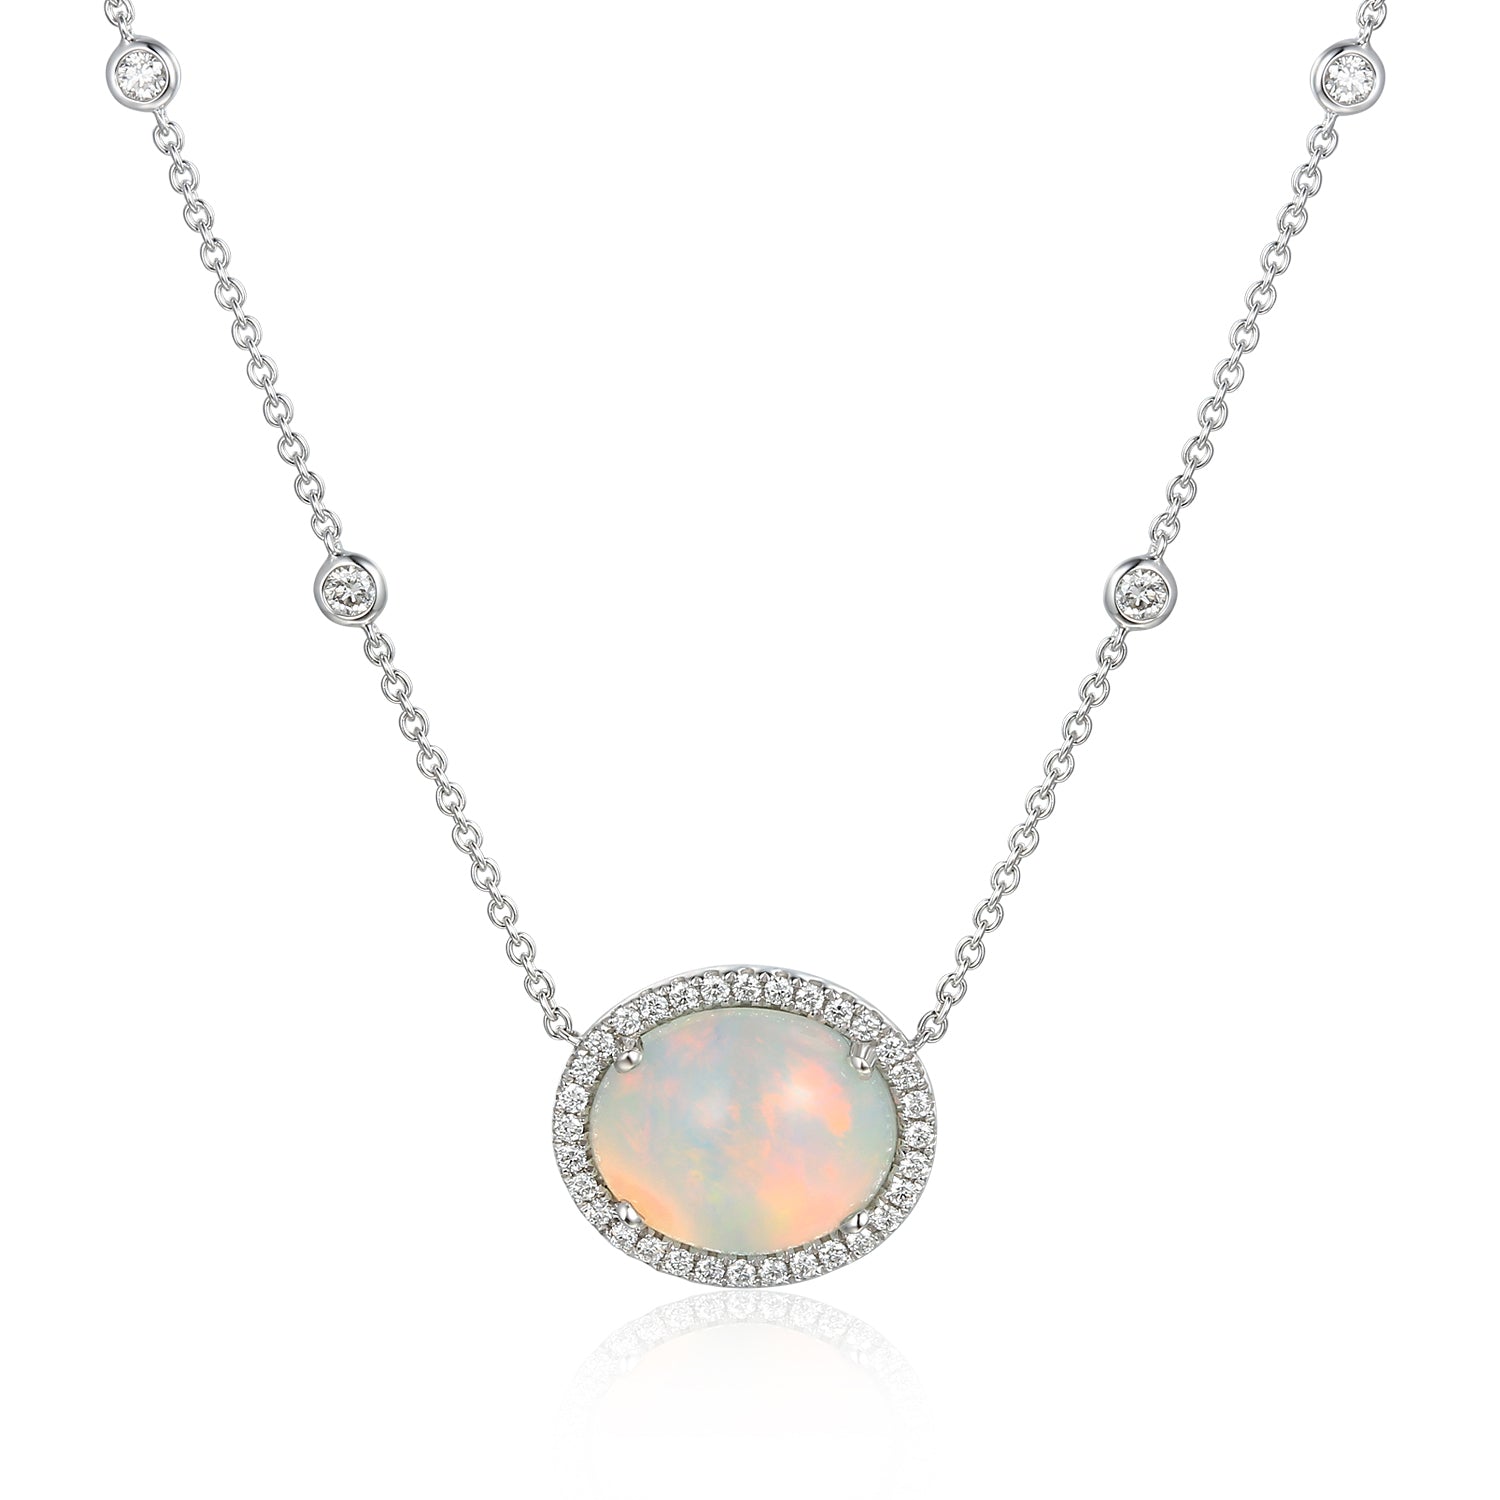 Oval Opal and Diamond Necklace